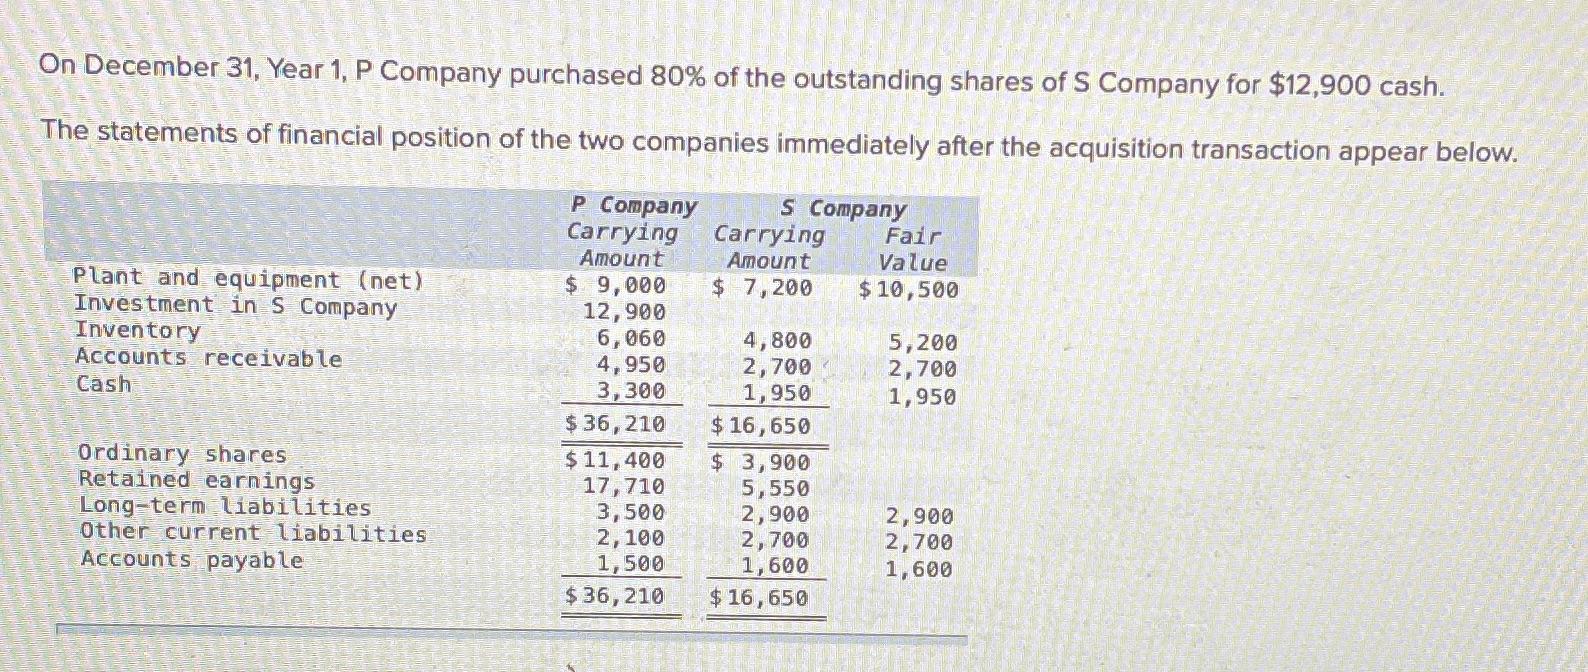 On December 31, Year 1, P Company purchased 80% of the outstanding shares of S Company for $12,900 cash. The